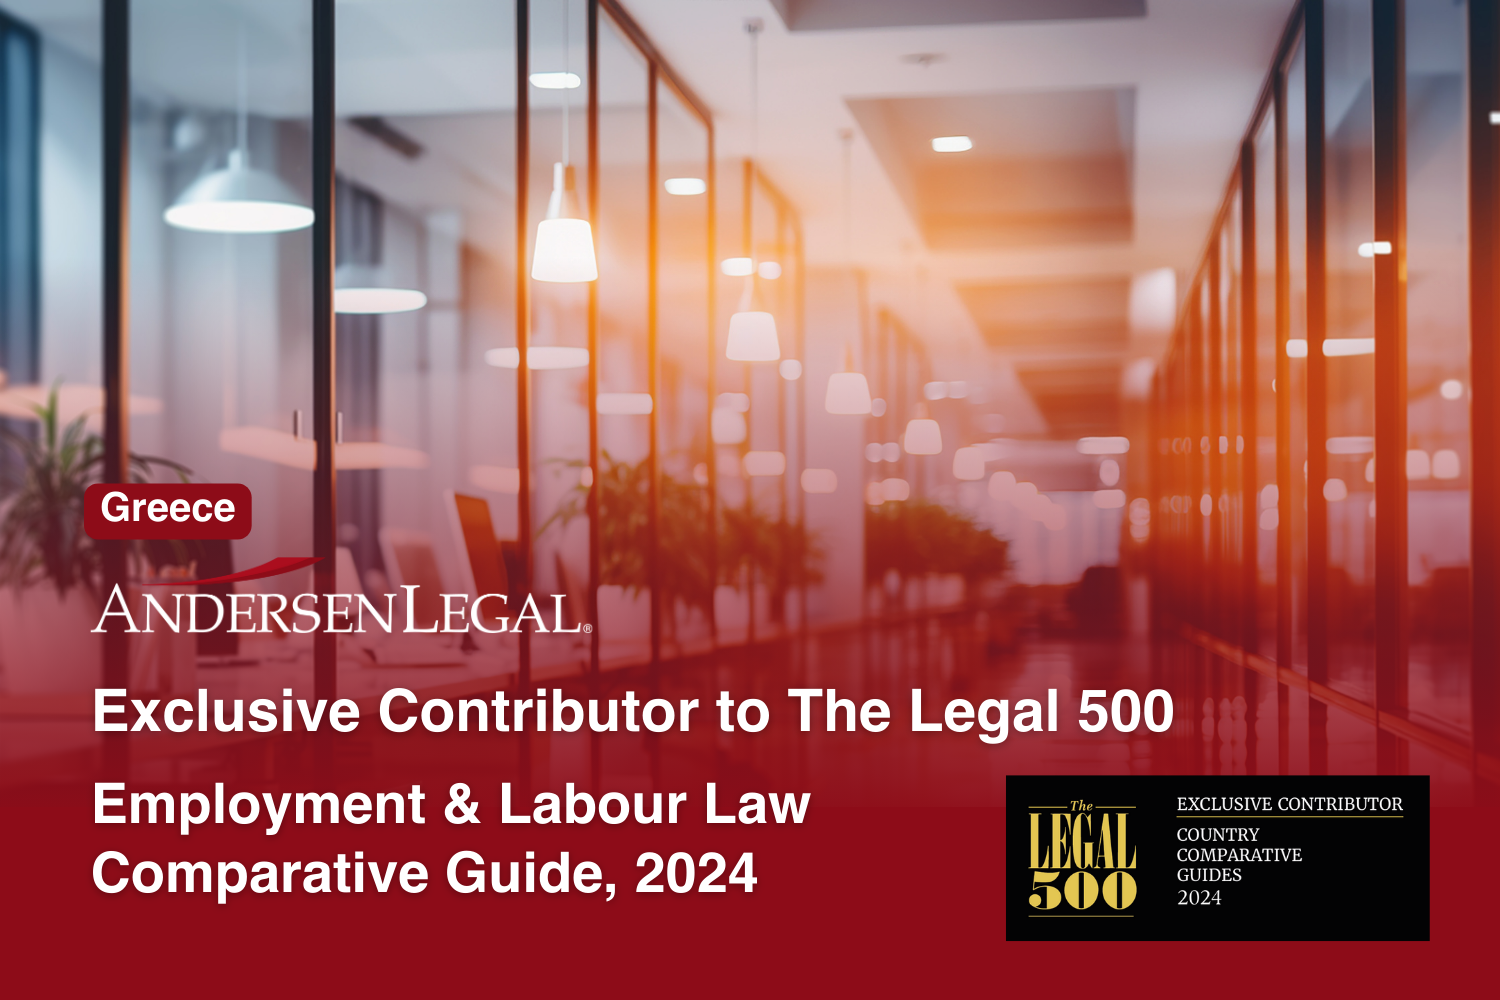 Andersen Legal: Exclusive contributor to The Legal 500 Employment & Labour Law Comparative Guide 2024